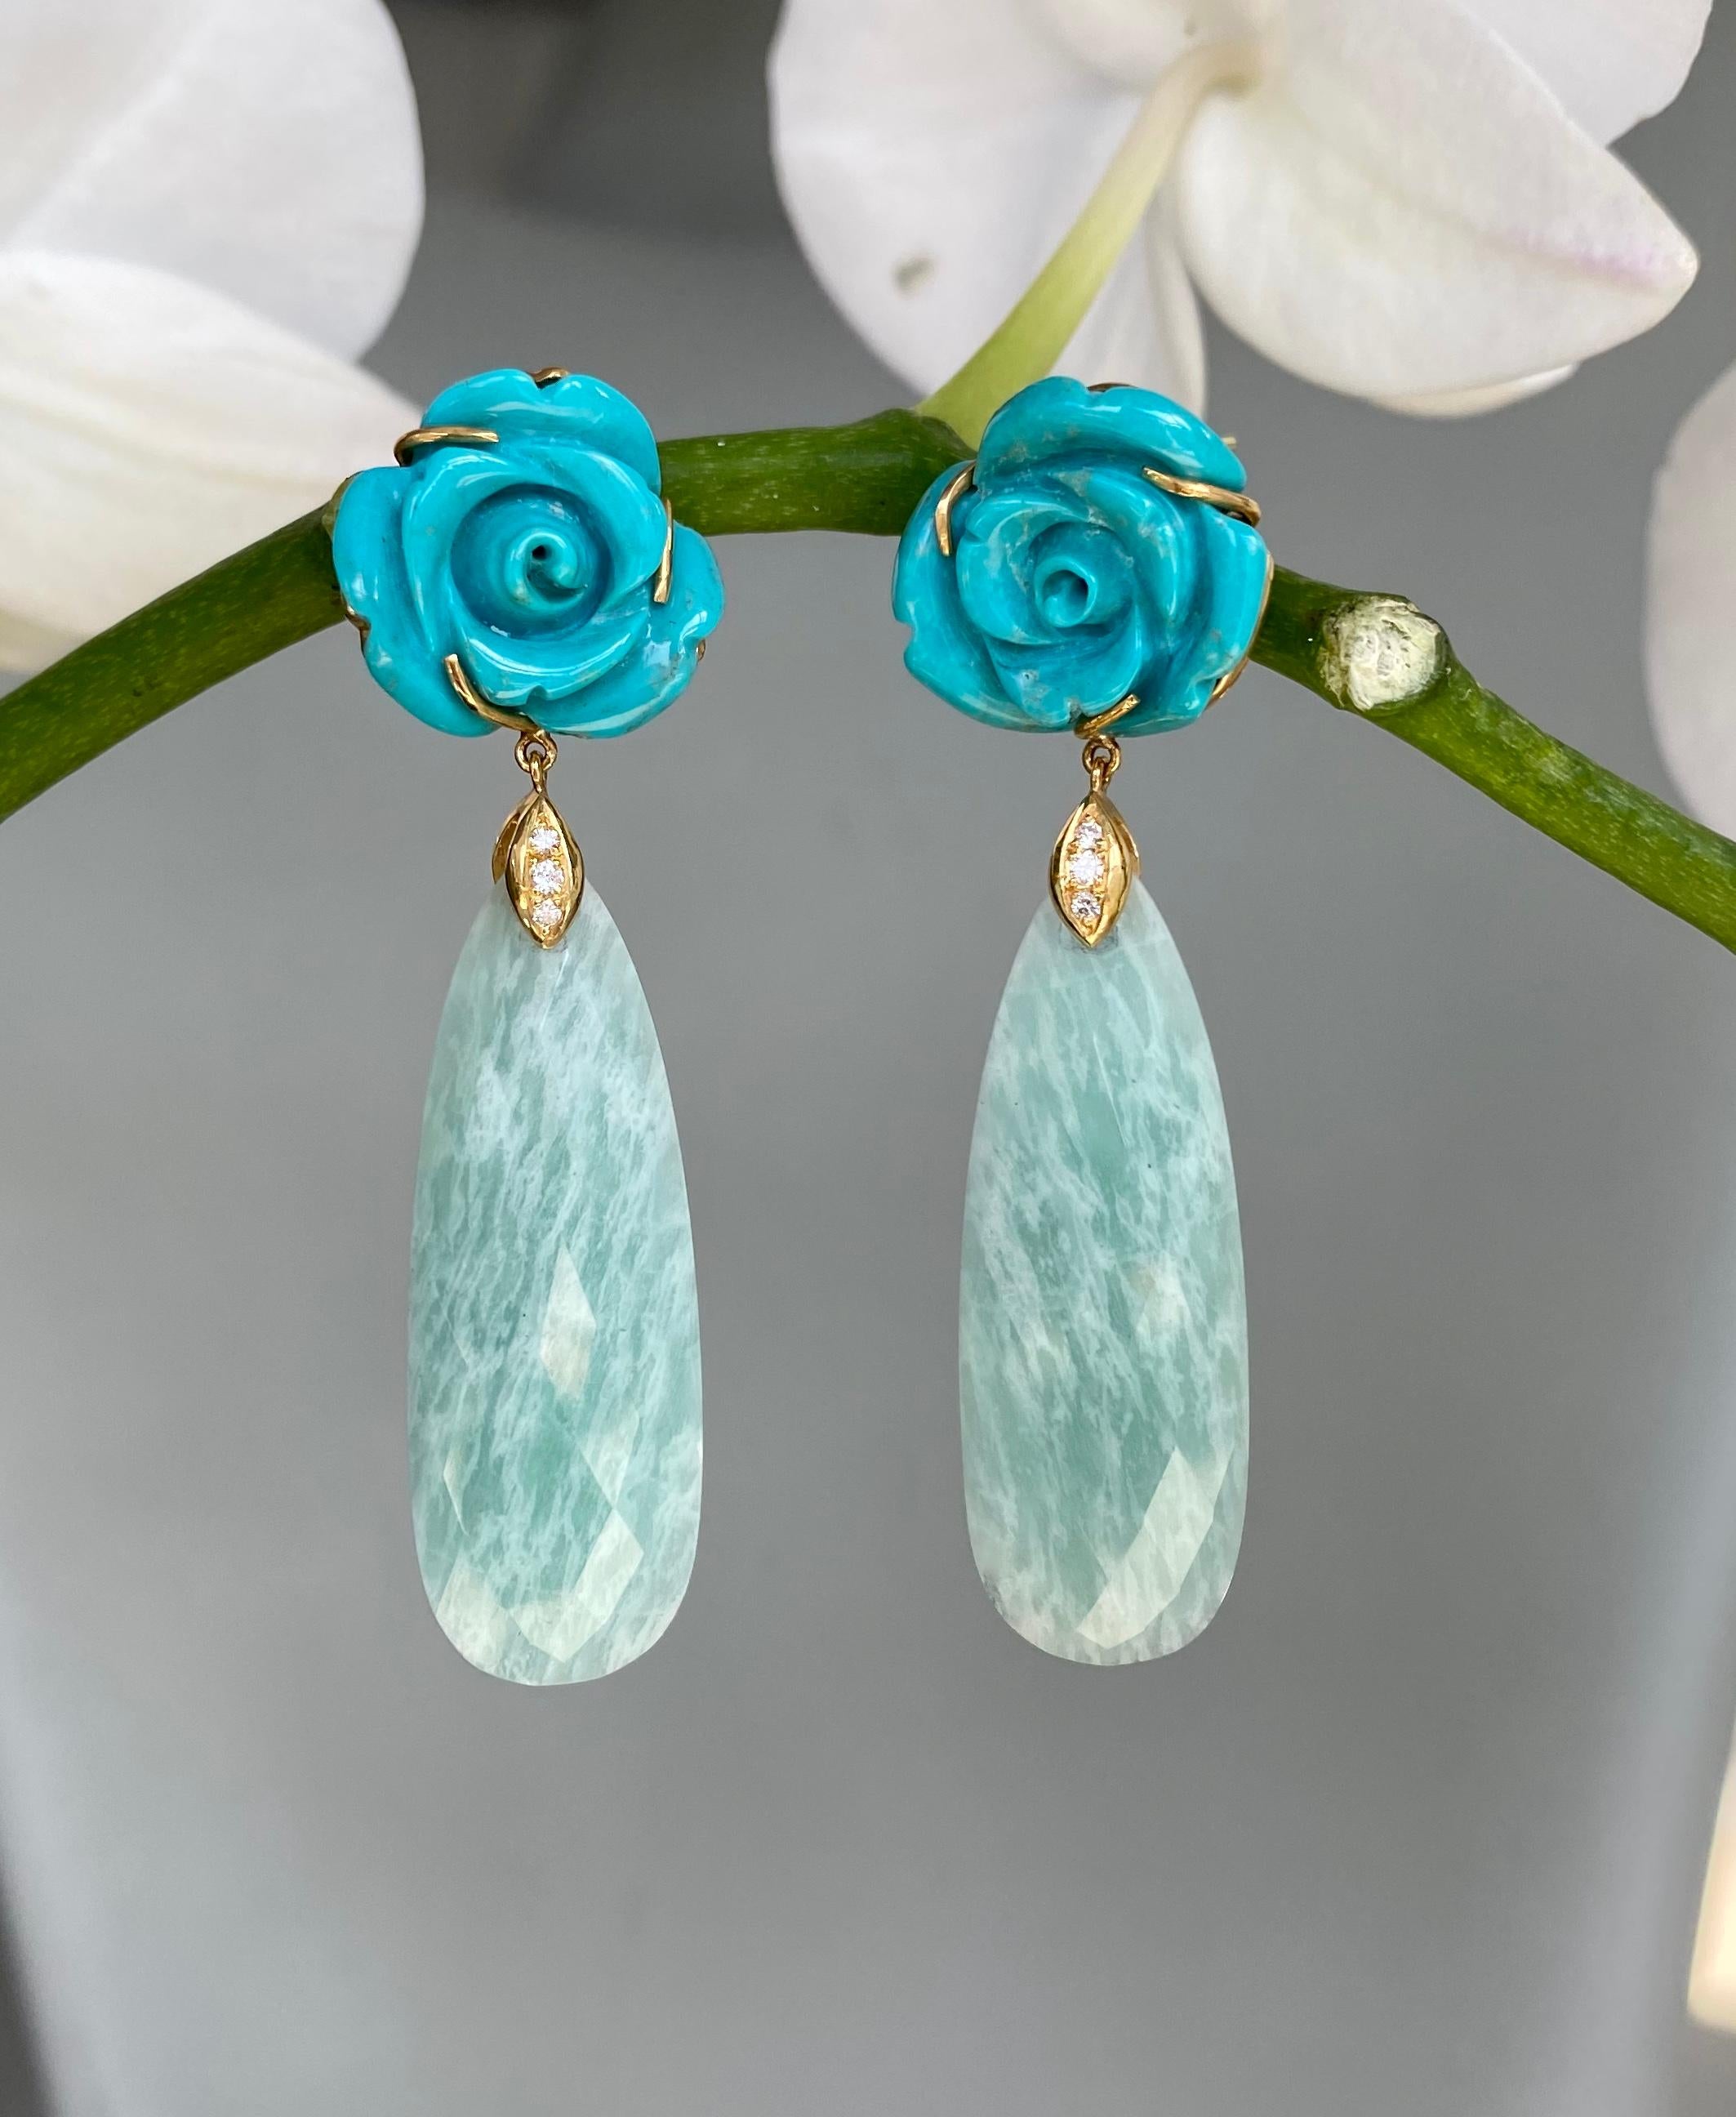 One-of-a-kind carved turquoise flowers, amazonites, and diamond dangle earrings bring a refreshing pop of bright colors into your spring and summer wardrobe. Handcrafted in 18 karat yellow gold. 2.36 inches or 60 mm length.

Carved flower gemstones